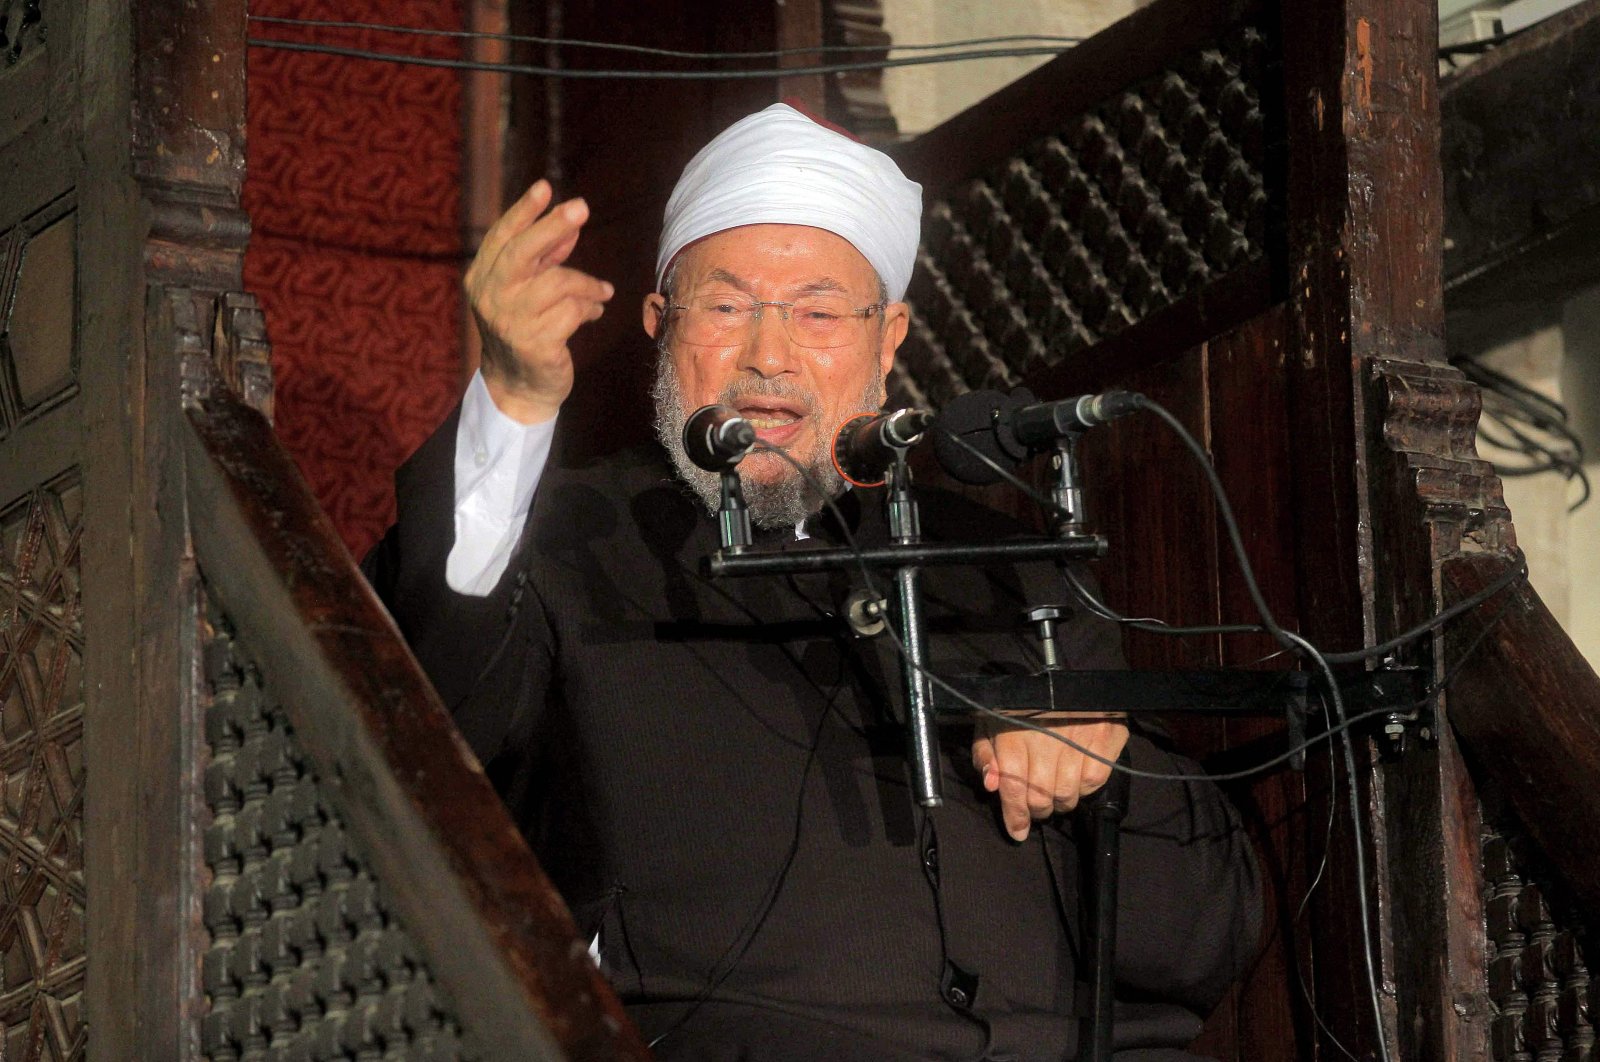 Youssef al-Qaradawi addresses Muslims at Al-Azhar mosque during weekly sermon, in Cairo, Egypt, Nov. 16, 2012. (AFP PHOTO) 